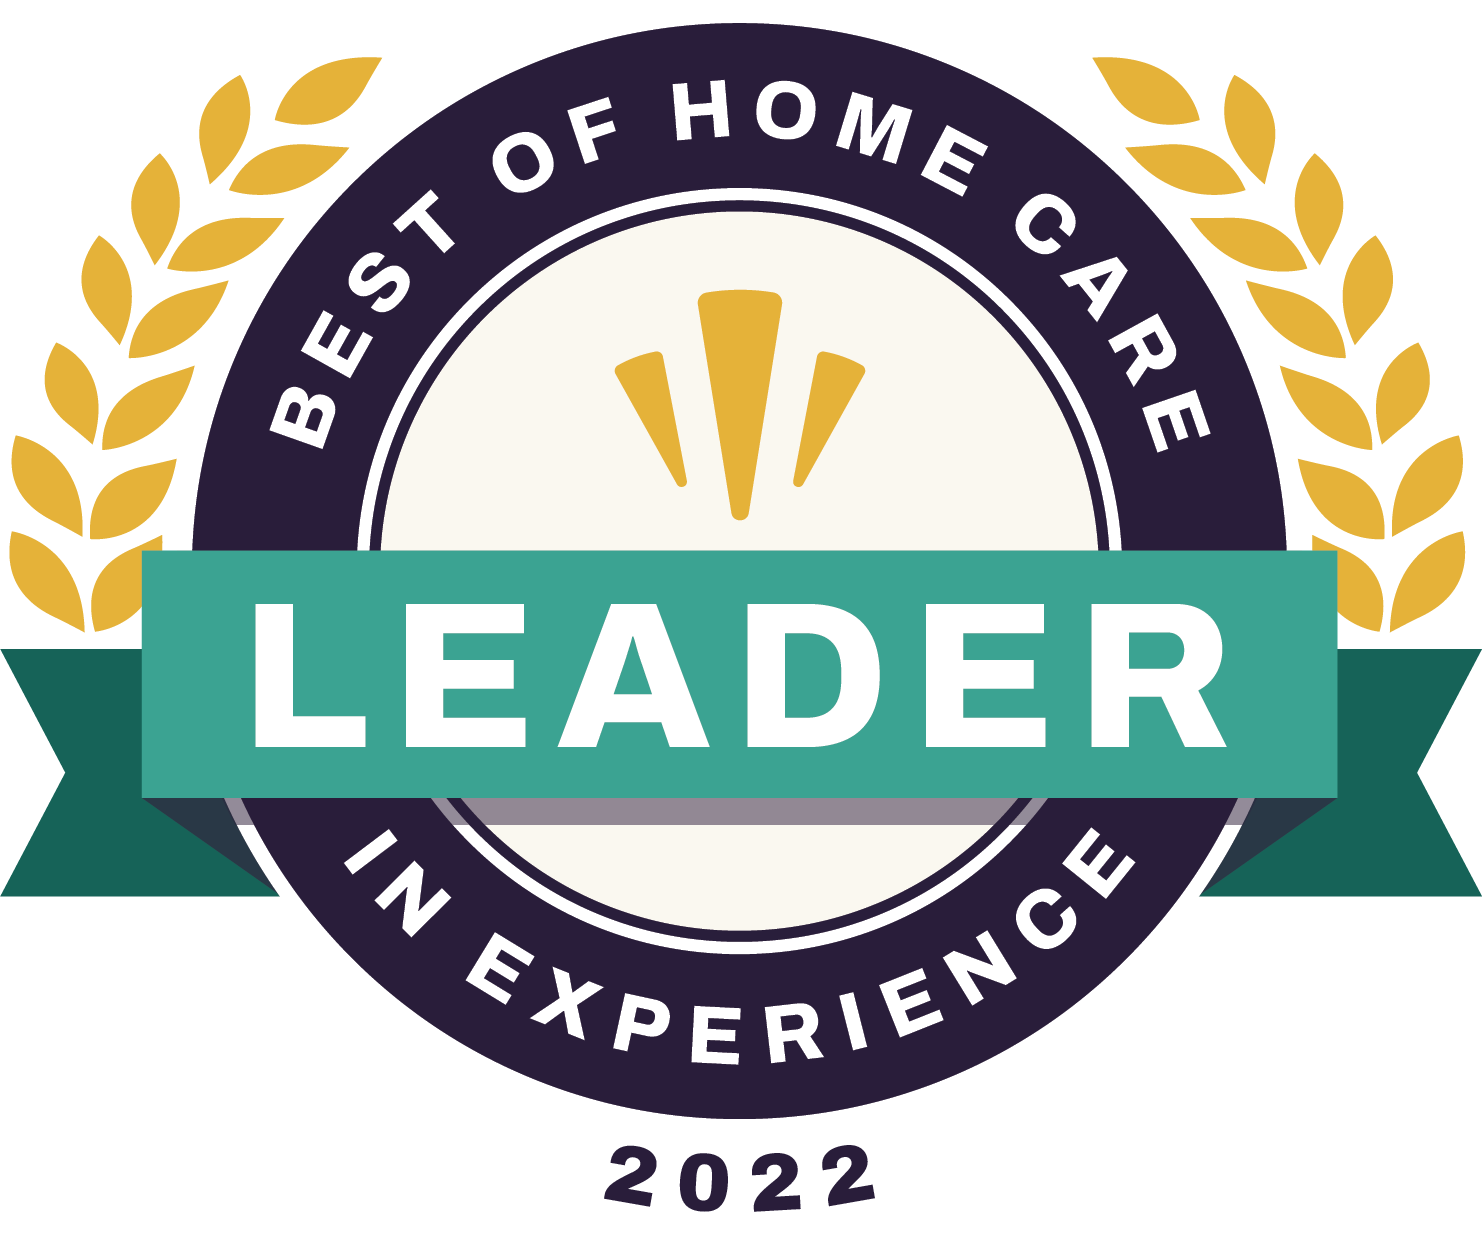 Best of Home Care 2022 Leader in Experience